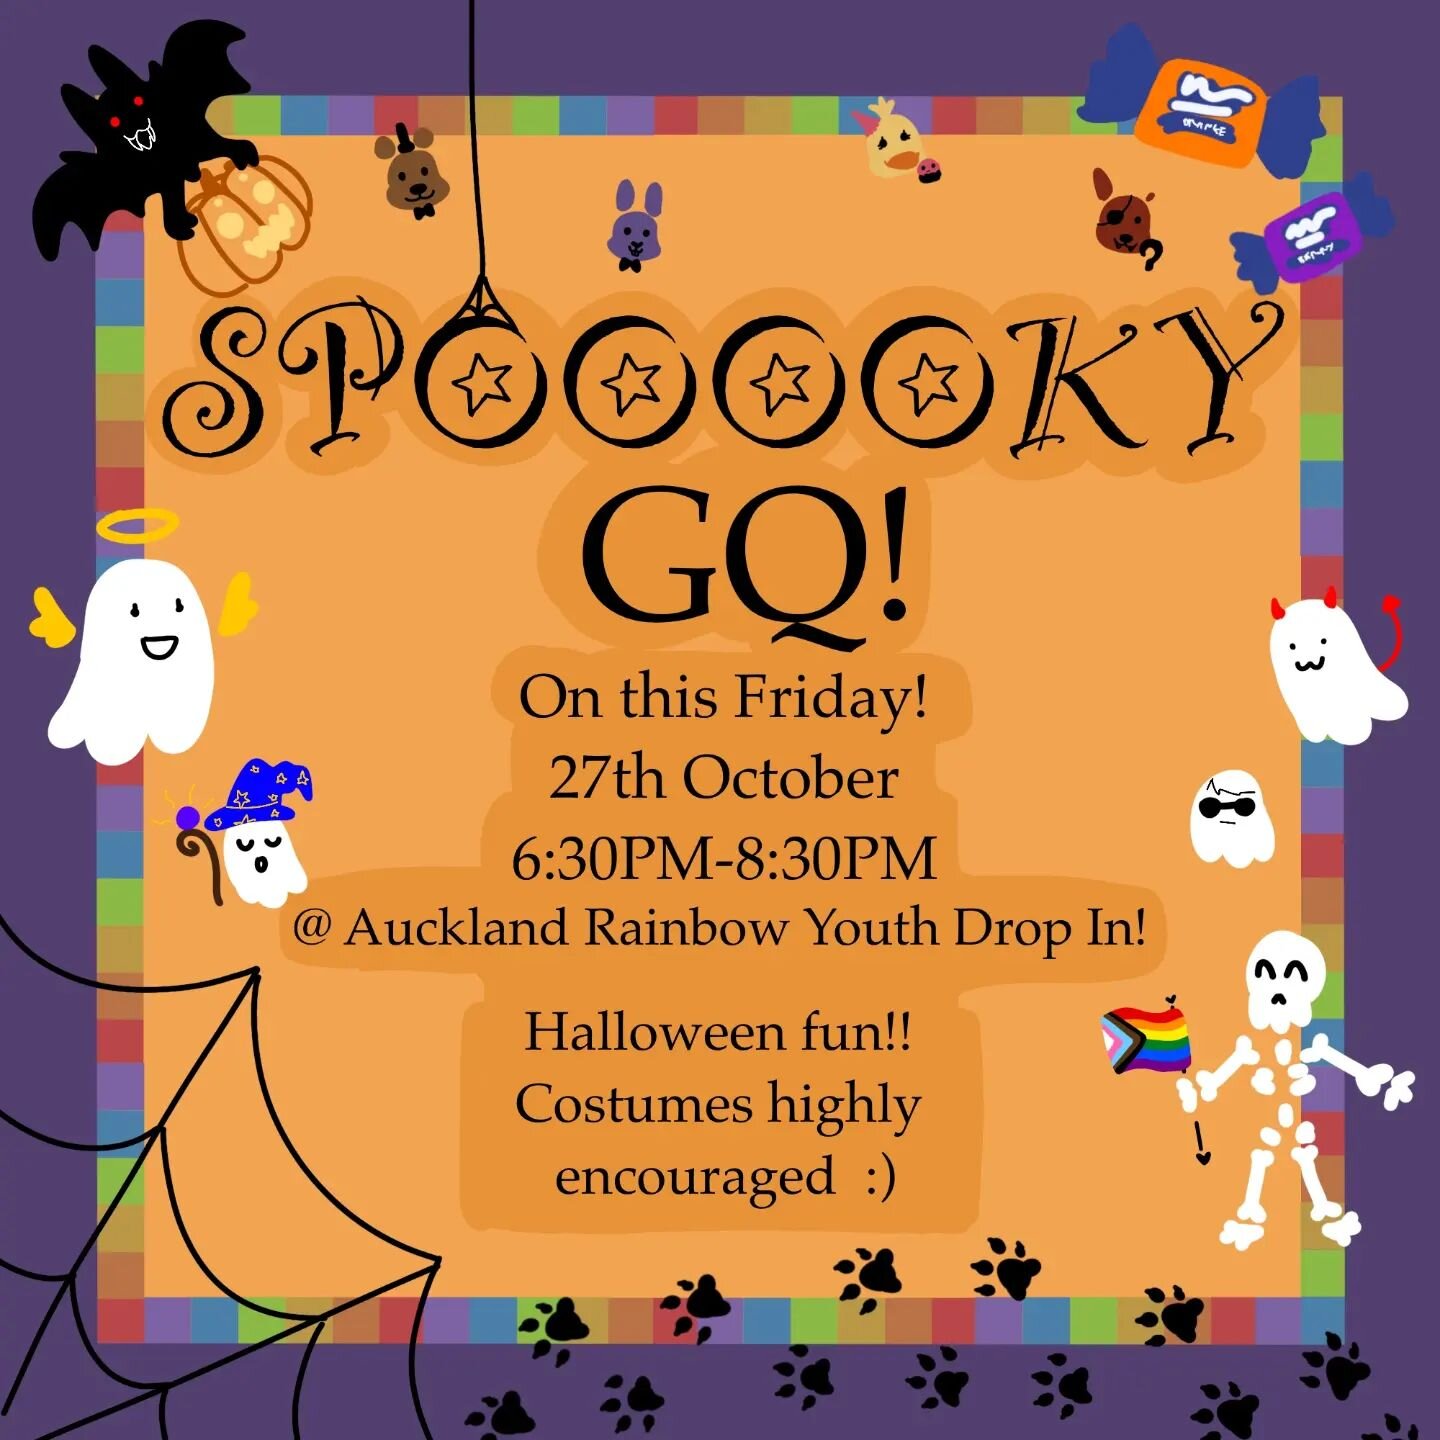 Kia ora ghouls! 

Come along to group this friday for some queer halloween fun &amp; treats! wear a costume &amp; bring a friend 🦇👻🎃🏳️&zwj;🌈🏳️&zwj;⚧️